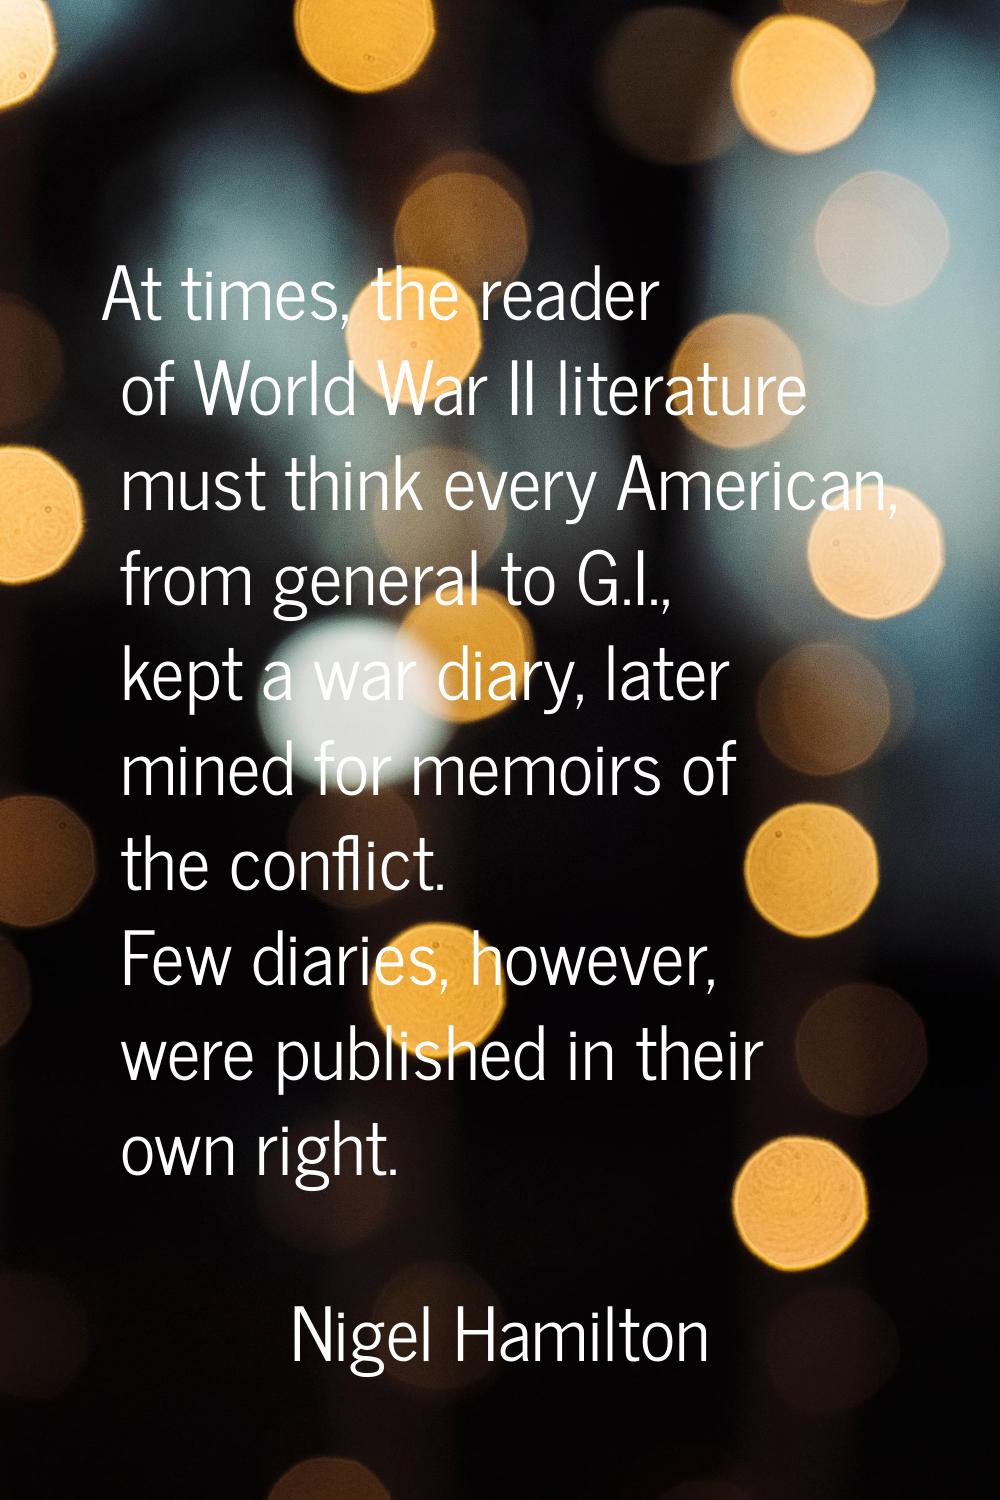 At times, the reader of World War II literature must think every American, from general to G.I., ke